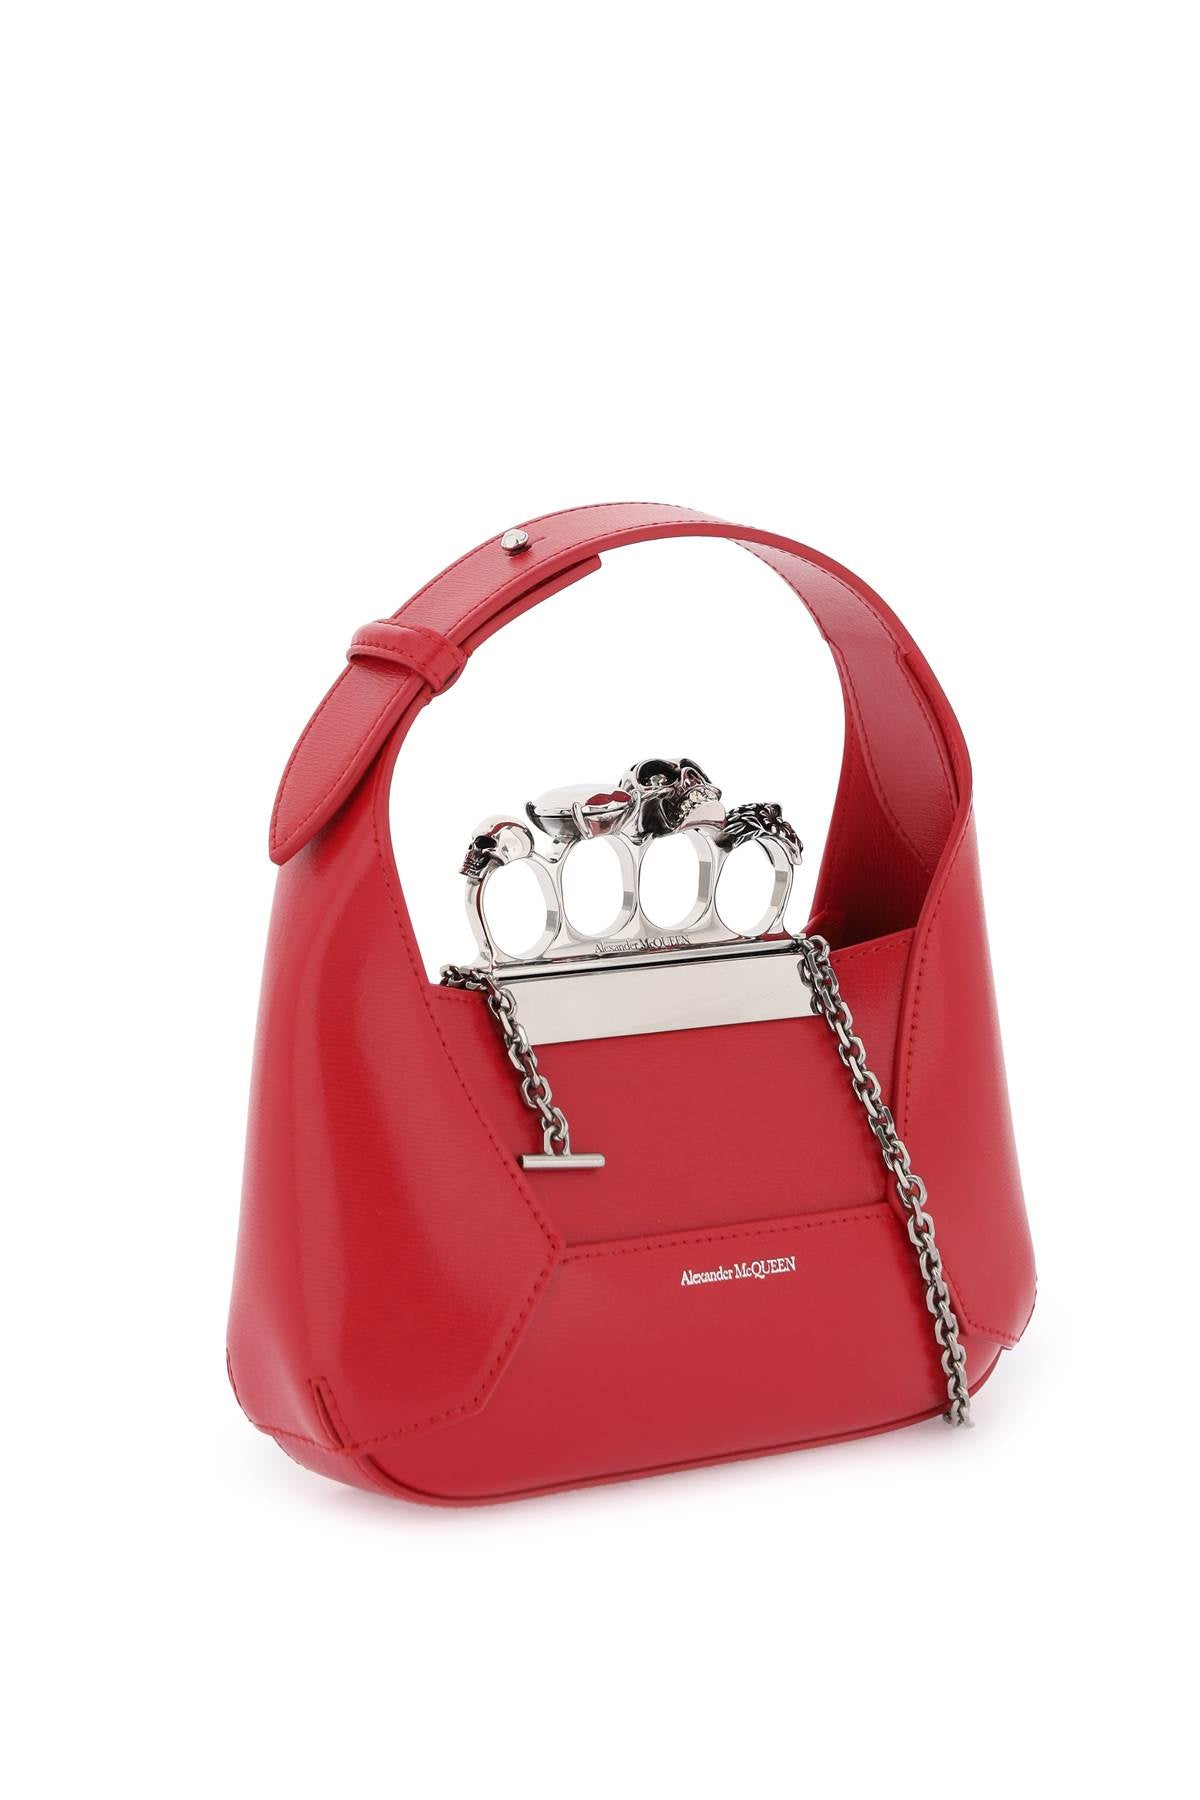 ALEXANDER MCQUEEN Mini Jewelled Hobo Handbag with Swarovski Rings and Detachable Chain Strap - Red Calfskin Leather